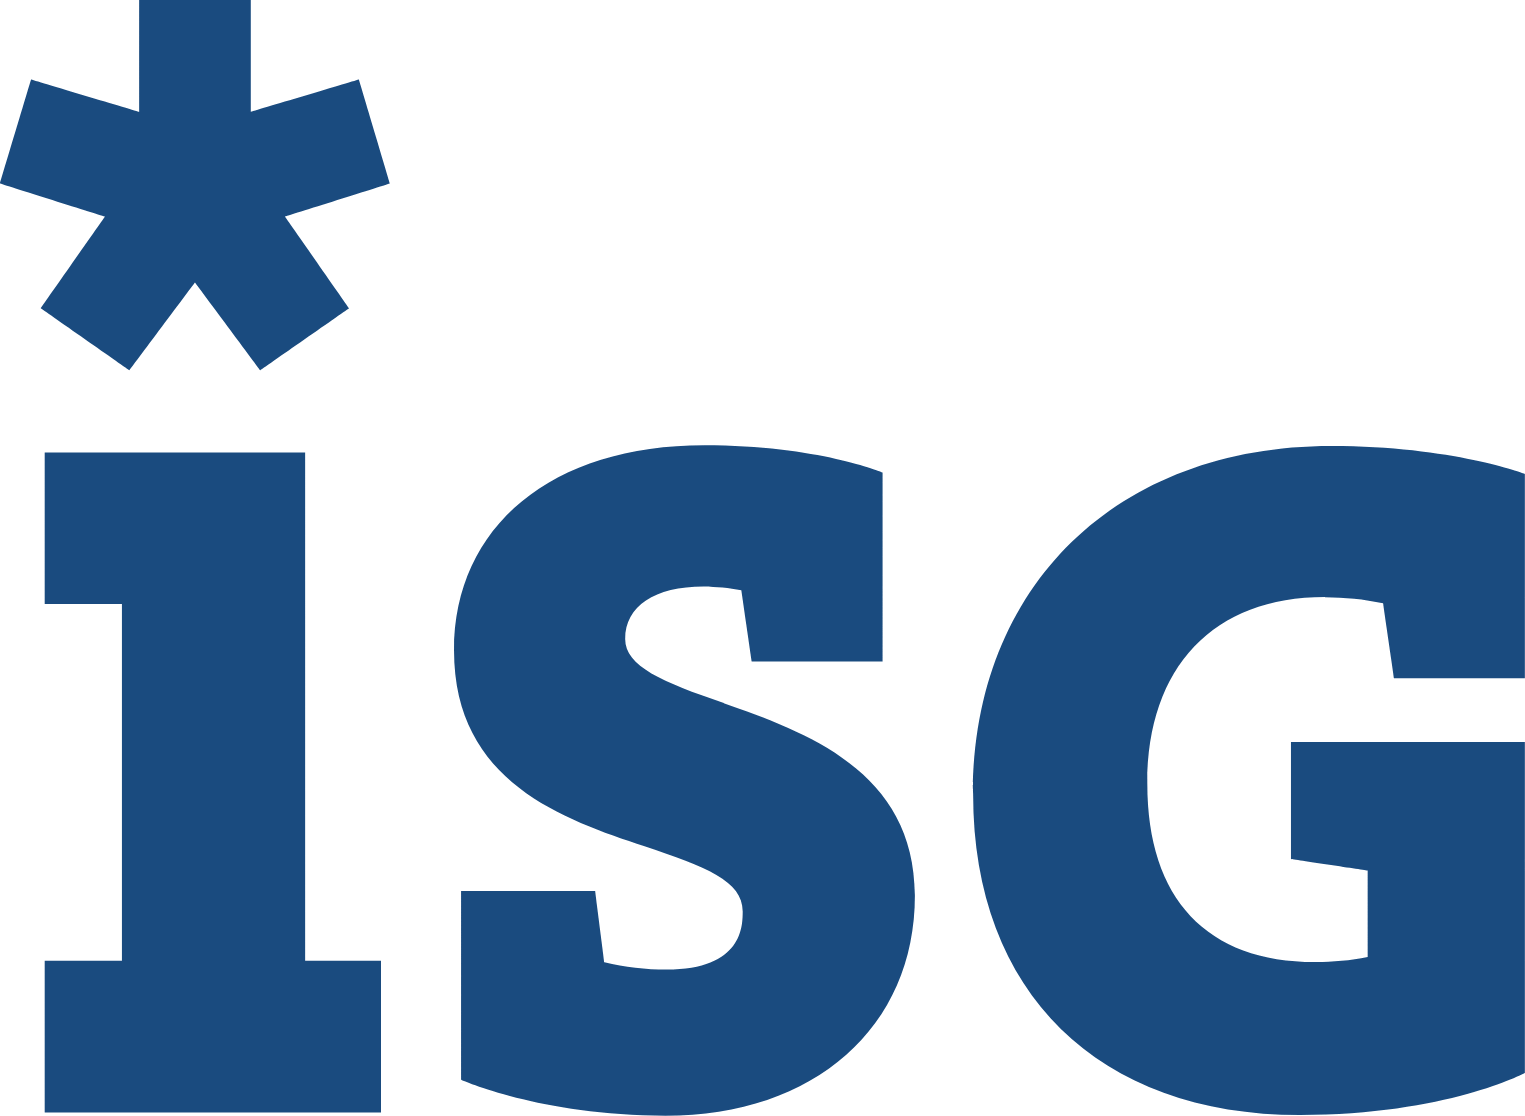 ISG Provider Lens - Cybersecurity - Solutions and Services 2023